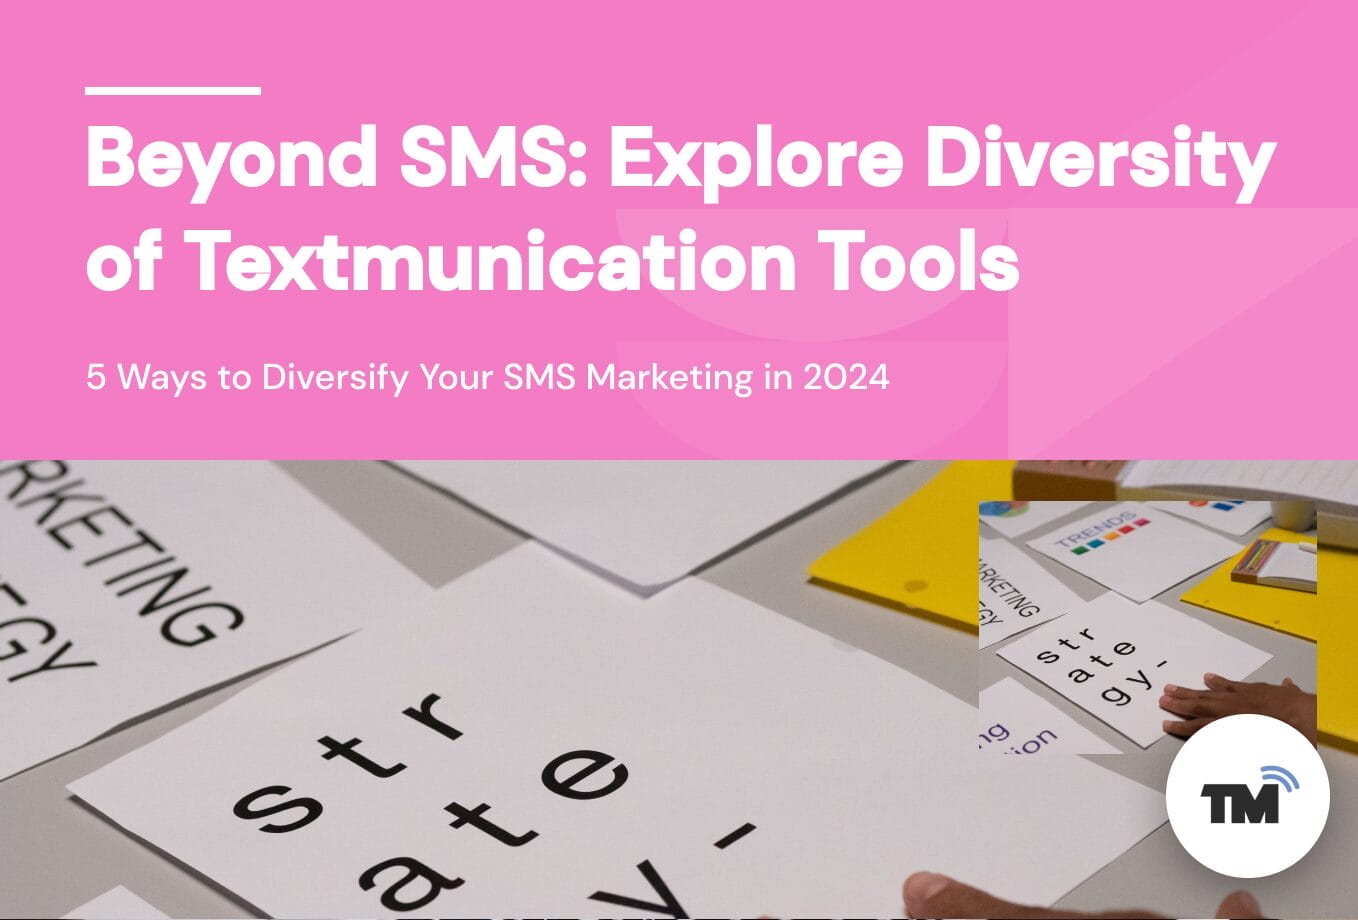 5 Ways to Diversify Your SMS Marketing in 2024